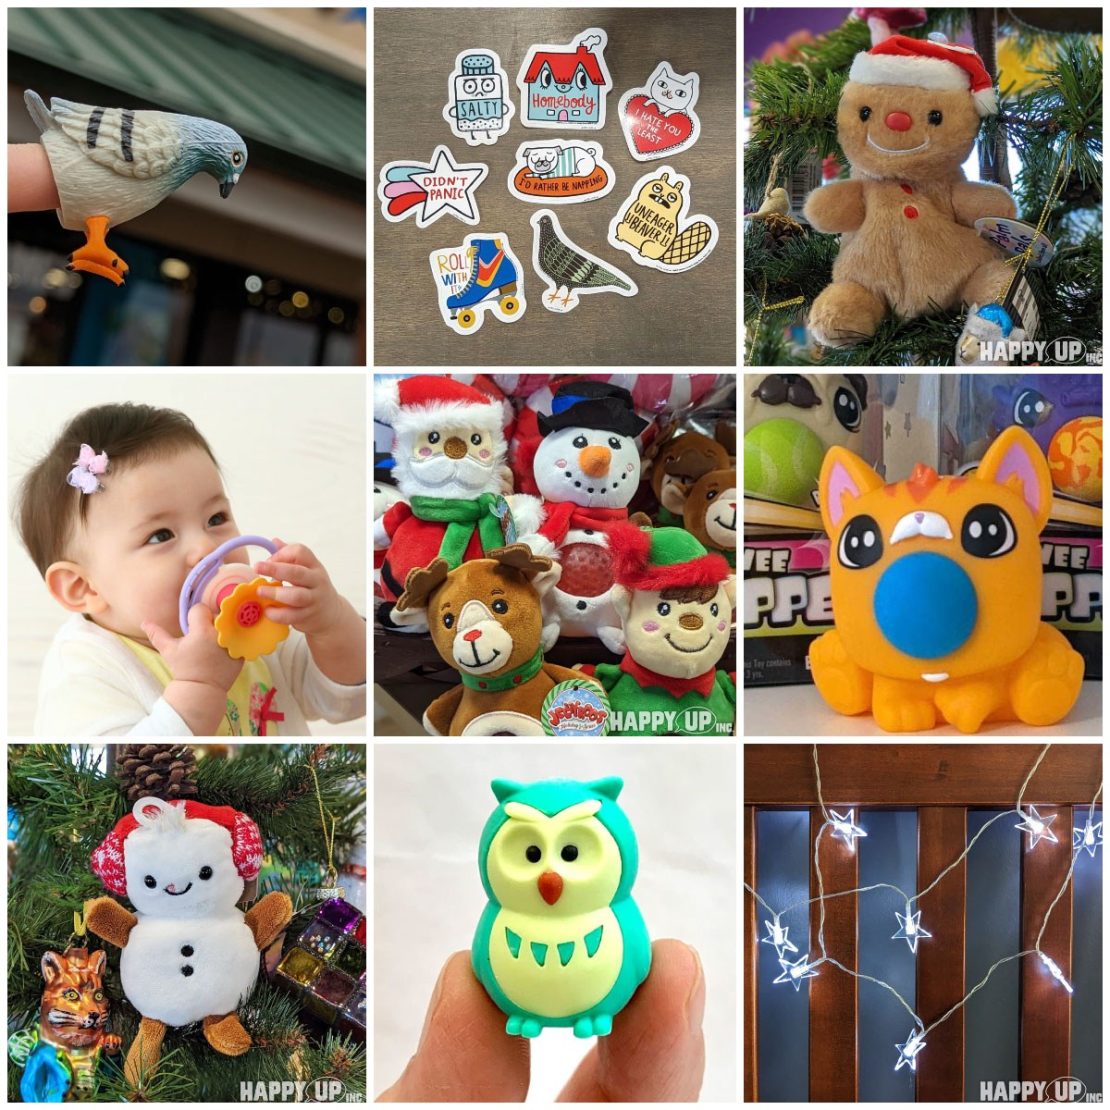 Christmas-y Stuffed Animals, Baby Toys, Sassy Stickers, and so much more!